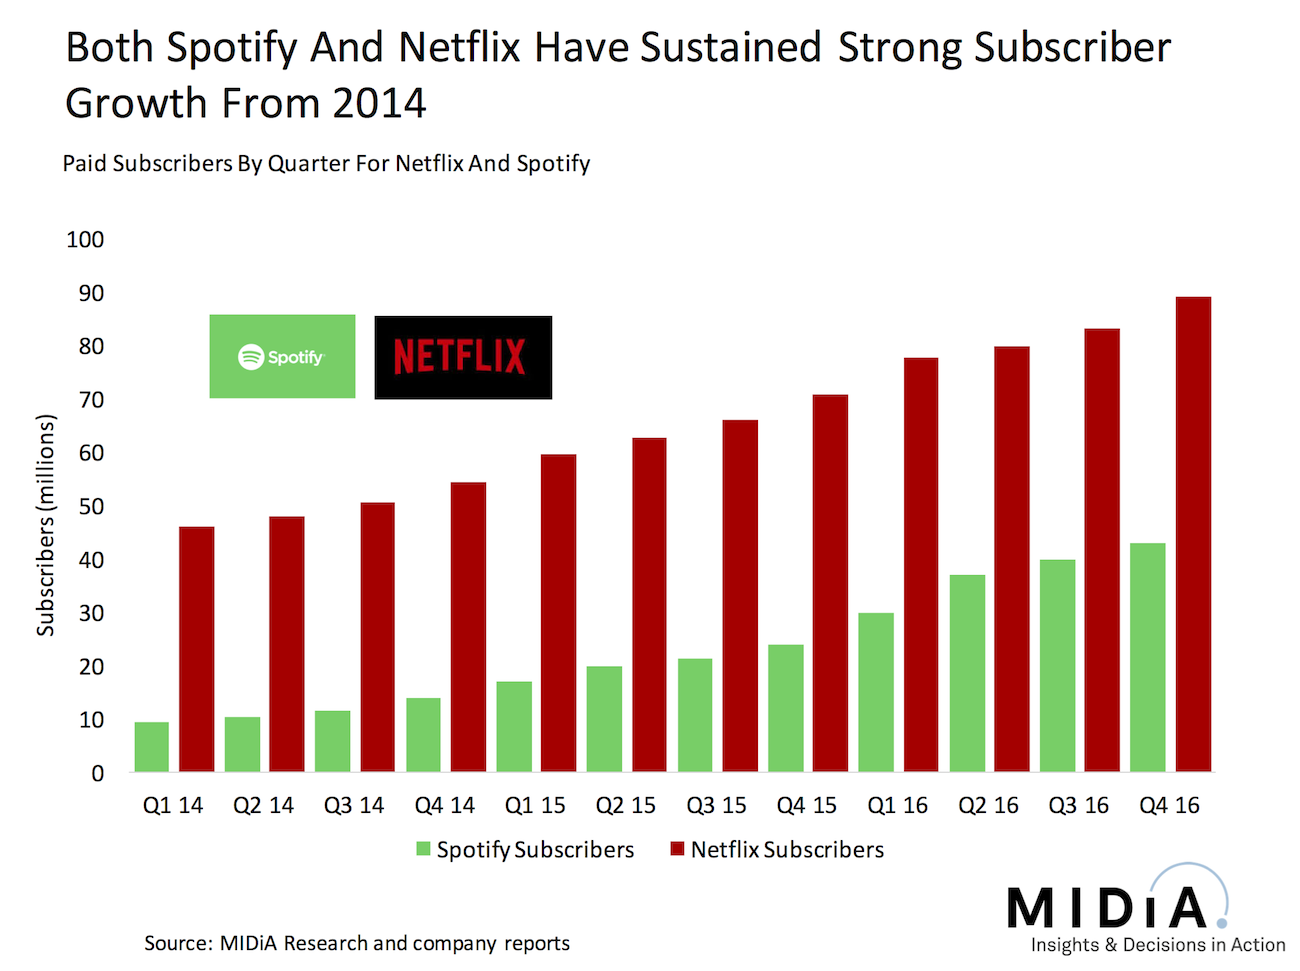 Cover image for Why Netflix Can Turn A Profit But Spotify Cannot (Yet)